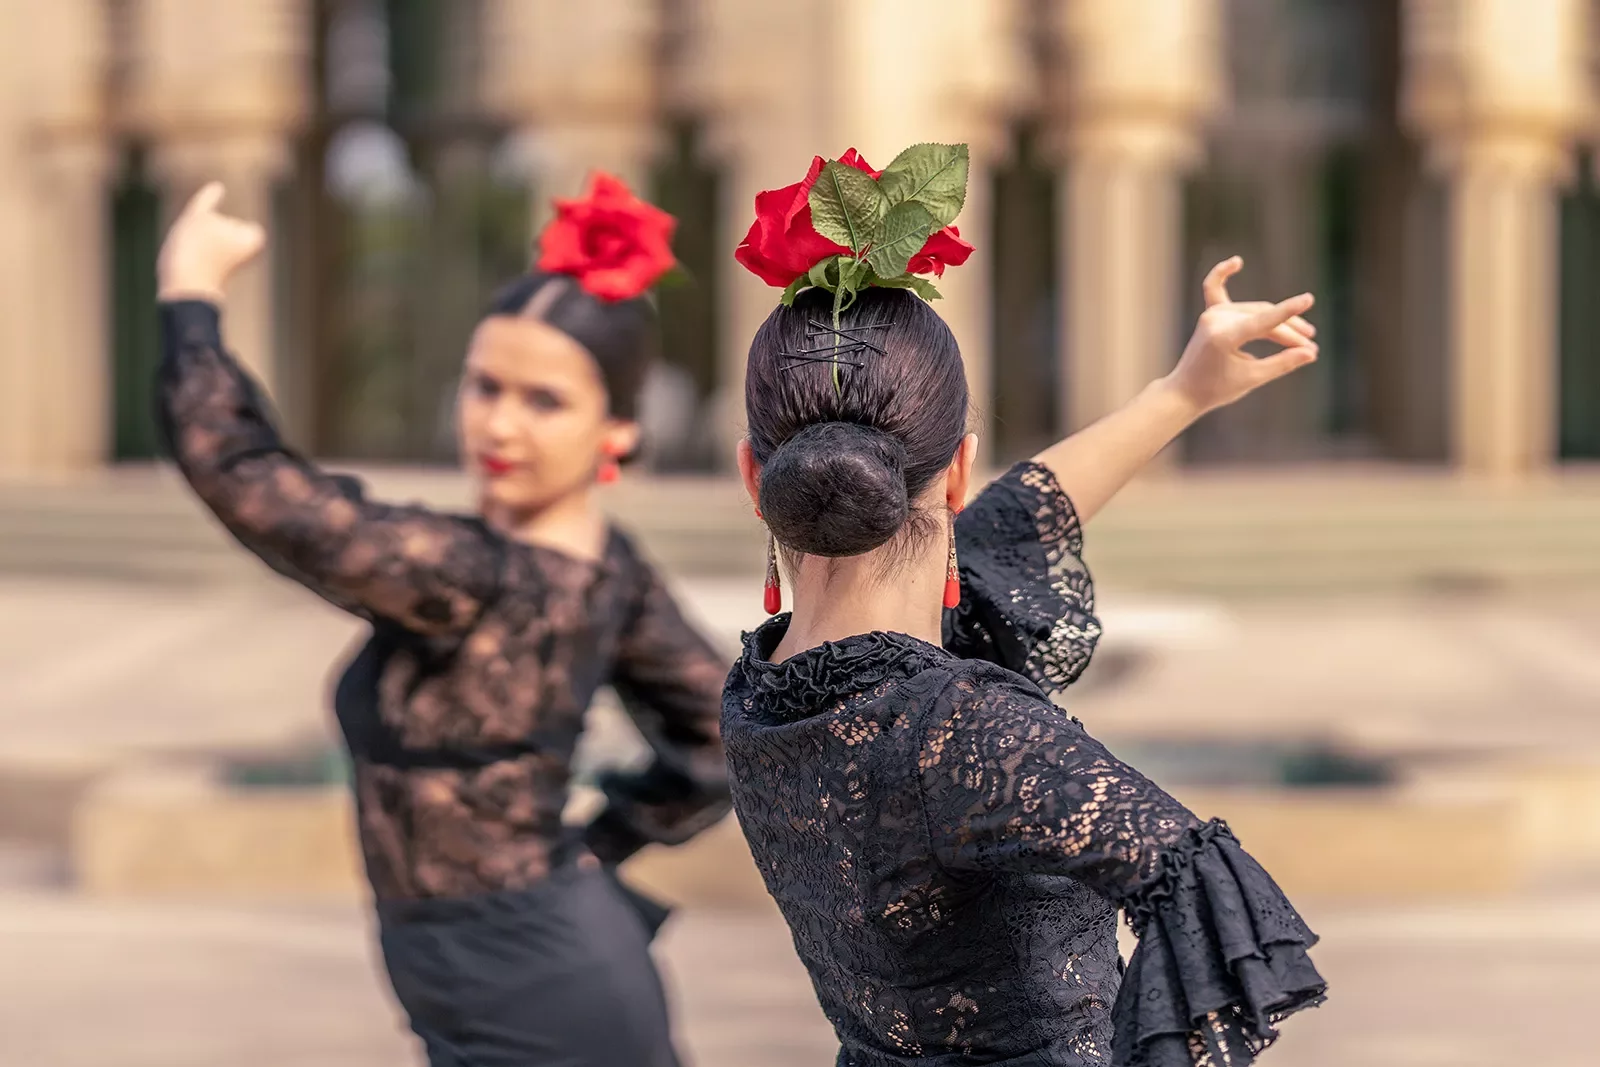 Two women dancing with large red roses on their heads